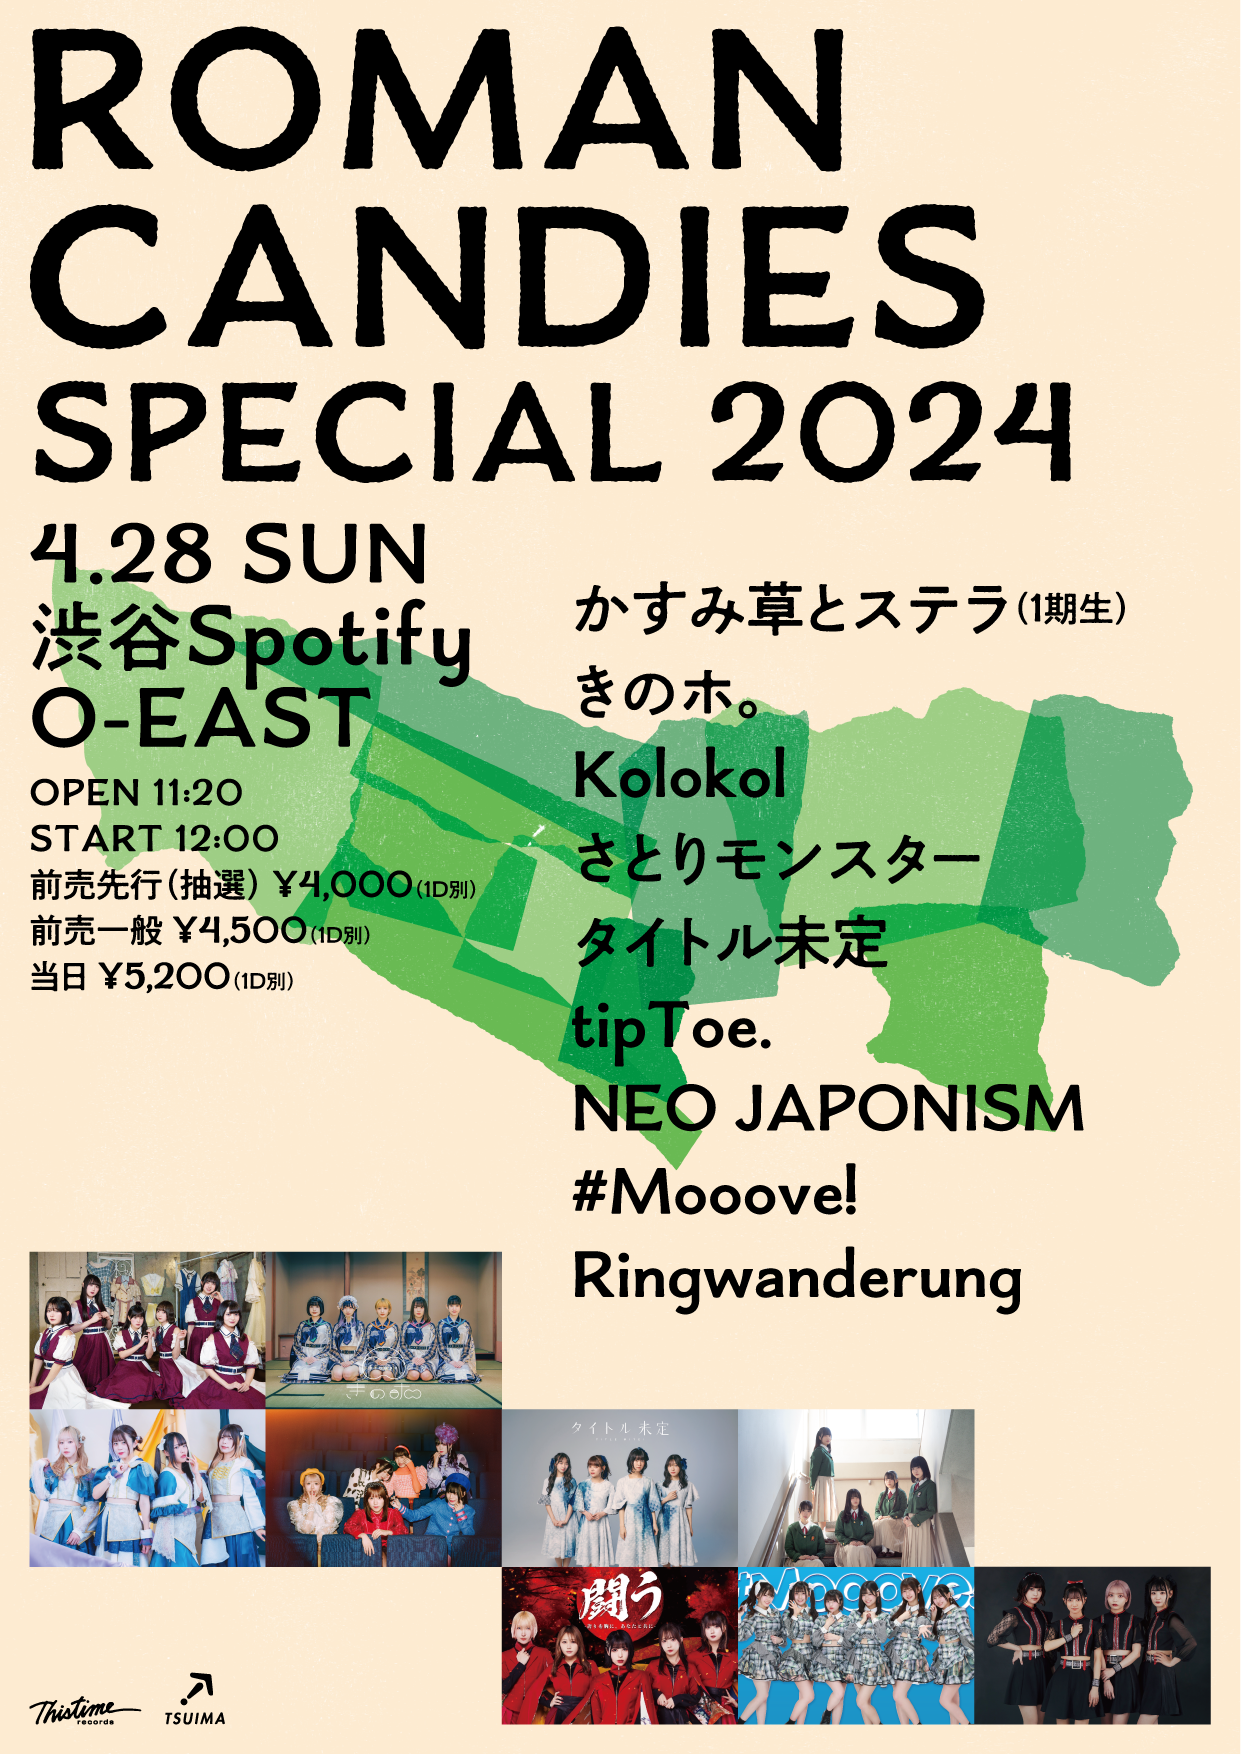 ROMAN CANDIES SPECIAL 2024